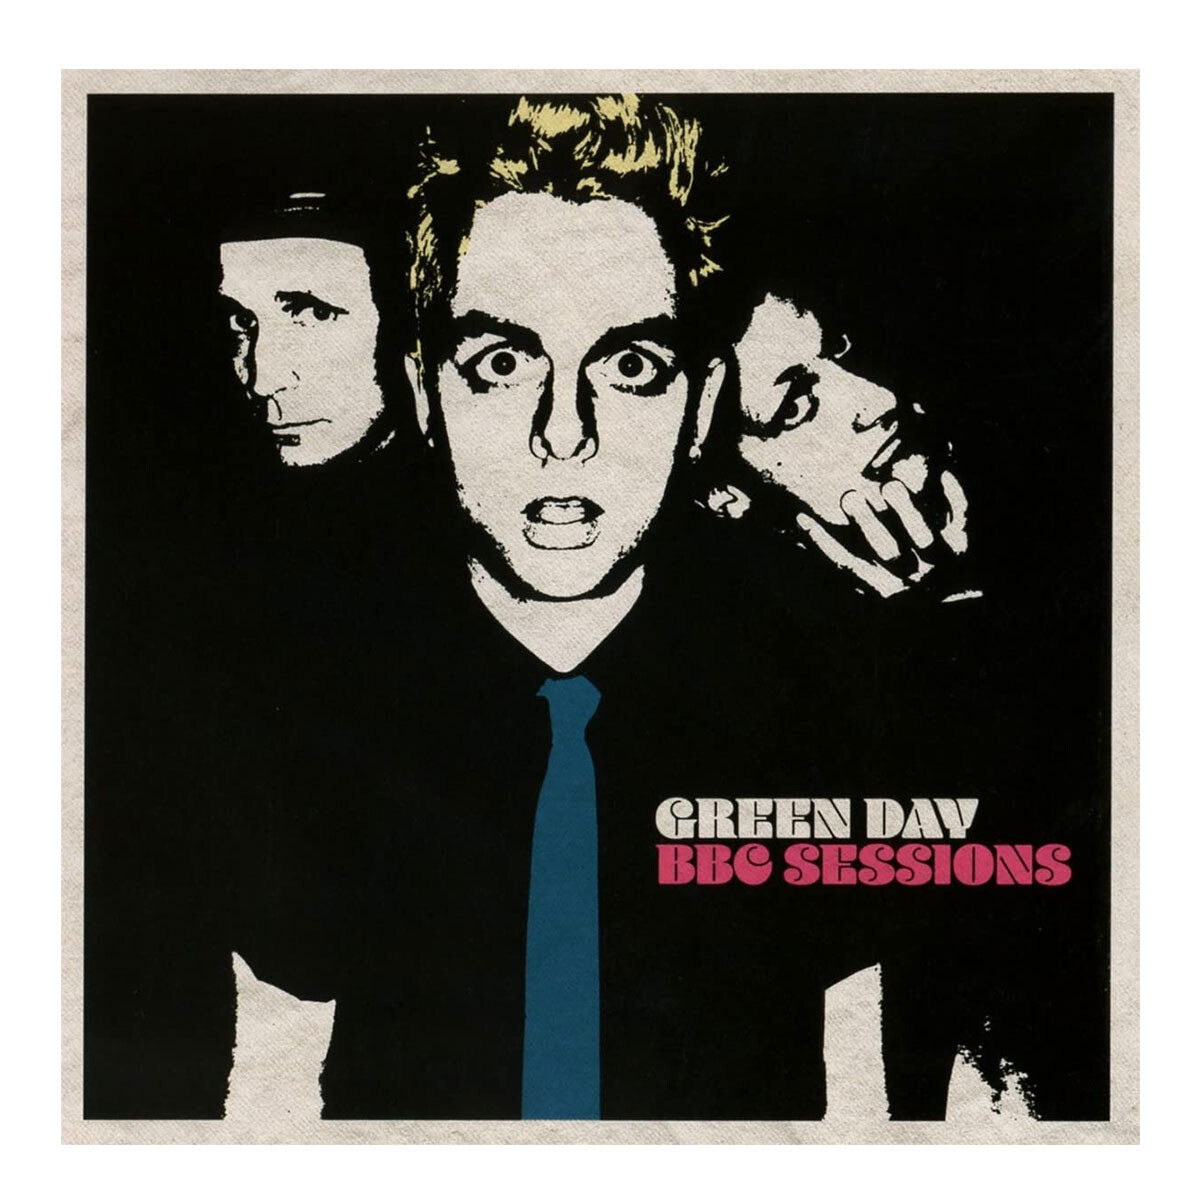 Green Day - Bbc Sessions - Lp 